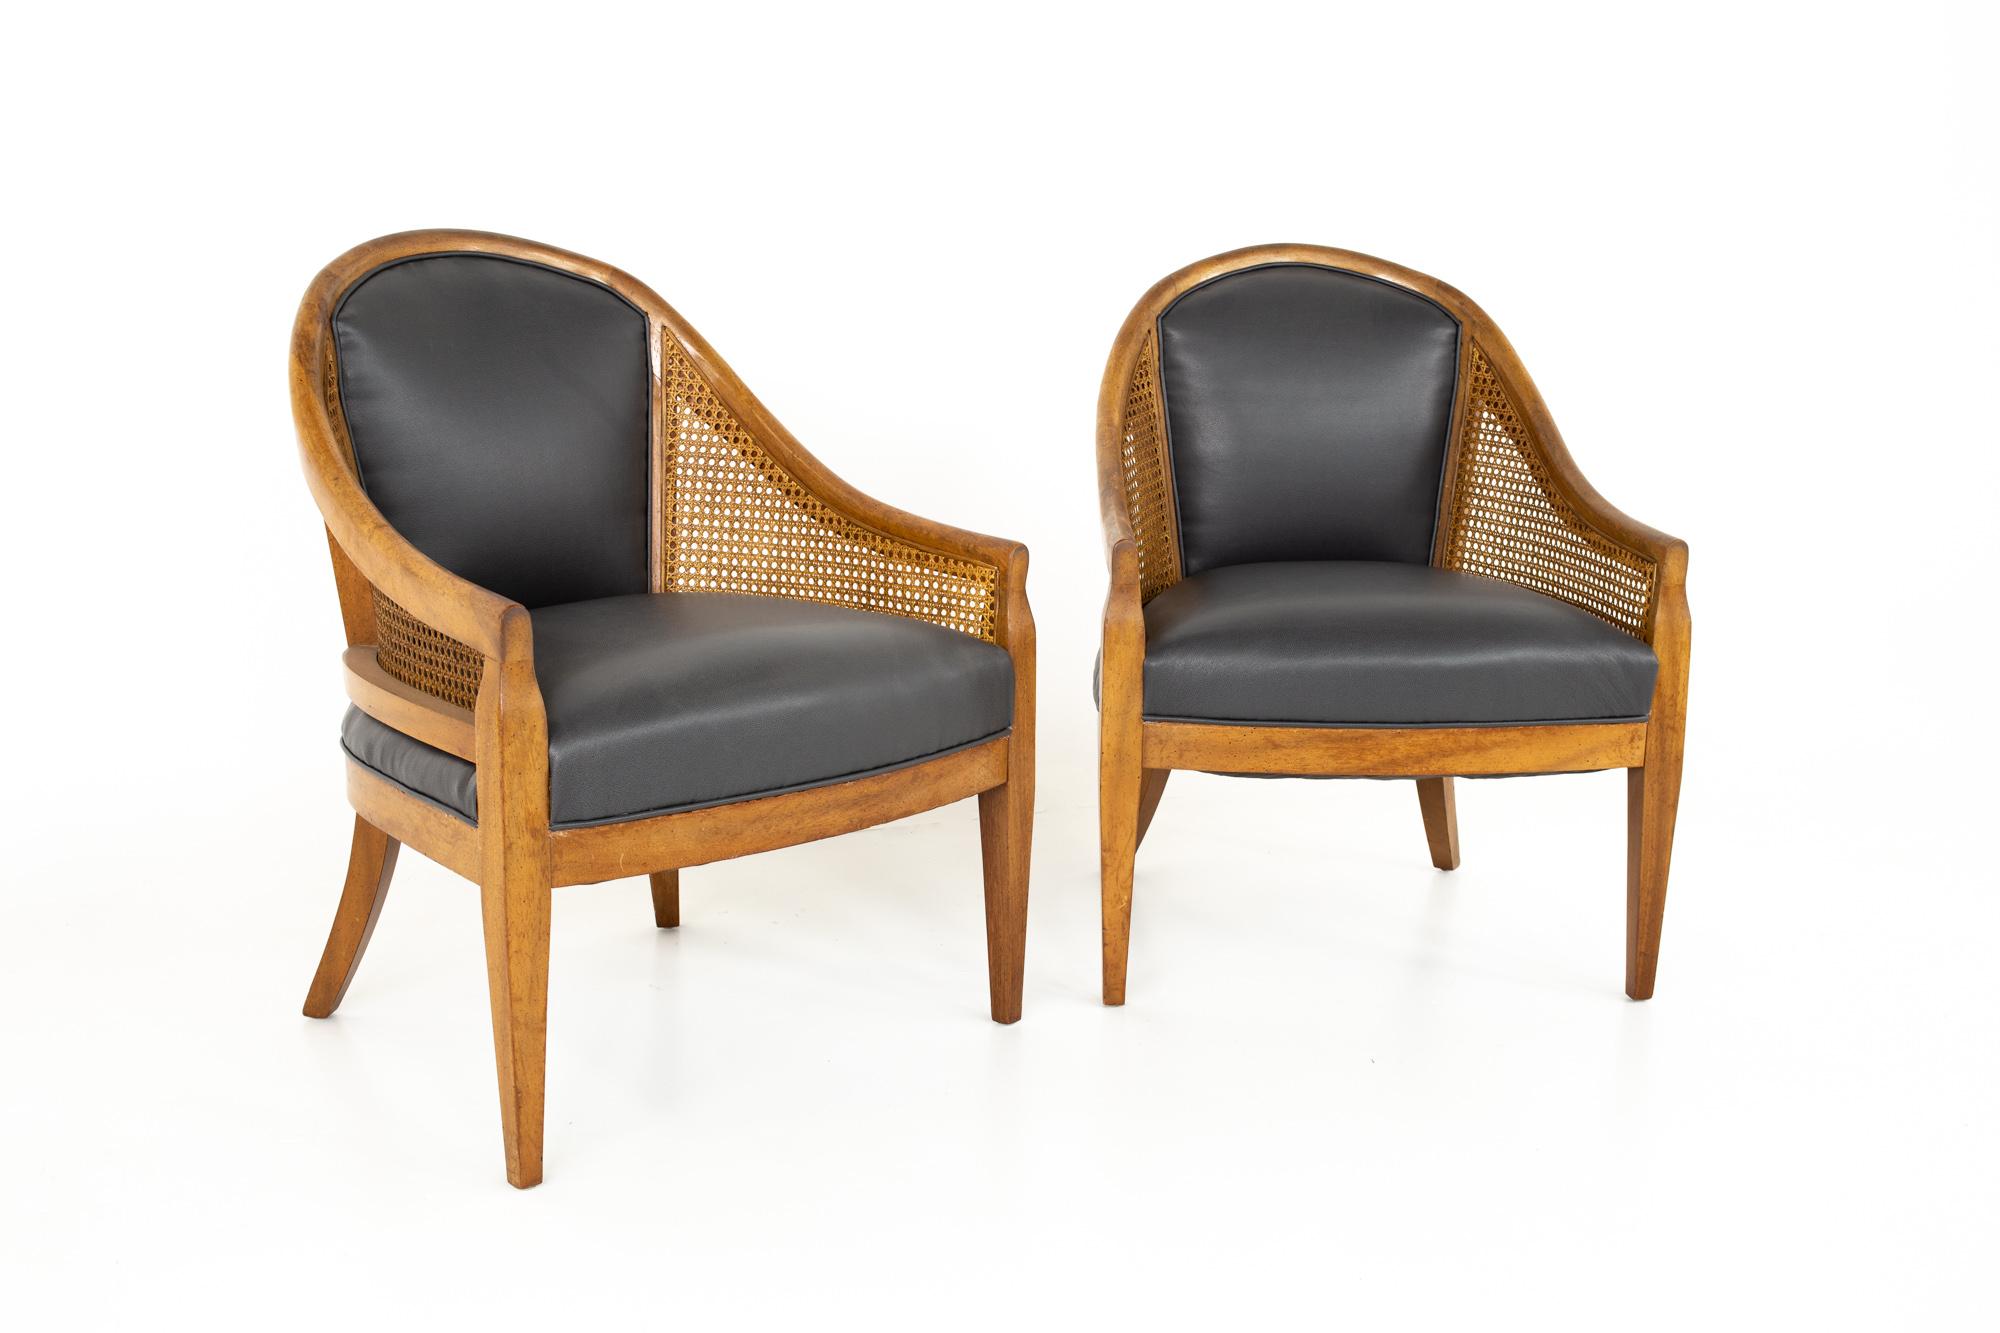 Mid Century cane chairs, pair
Each chair measures: 25.25 wide x 25.25 deep x 32.75 high, with a seat height of 17.25 inches

Each piece of furniture is available in what we call restored vintage condition. Upon purchase it is thoroughly cleaned and